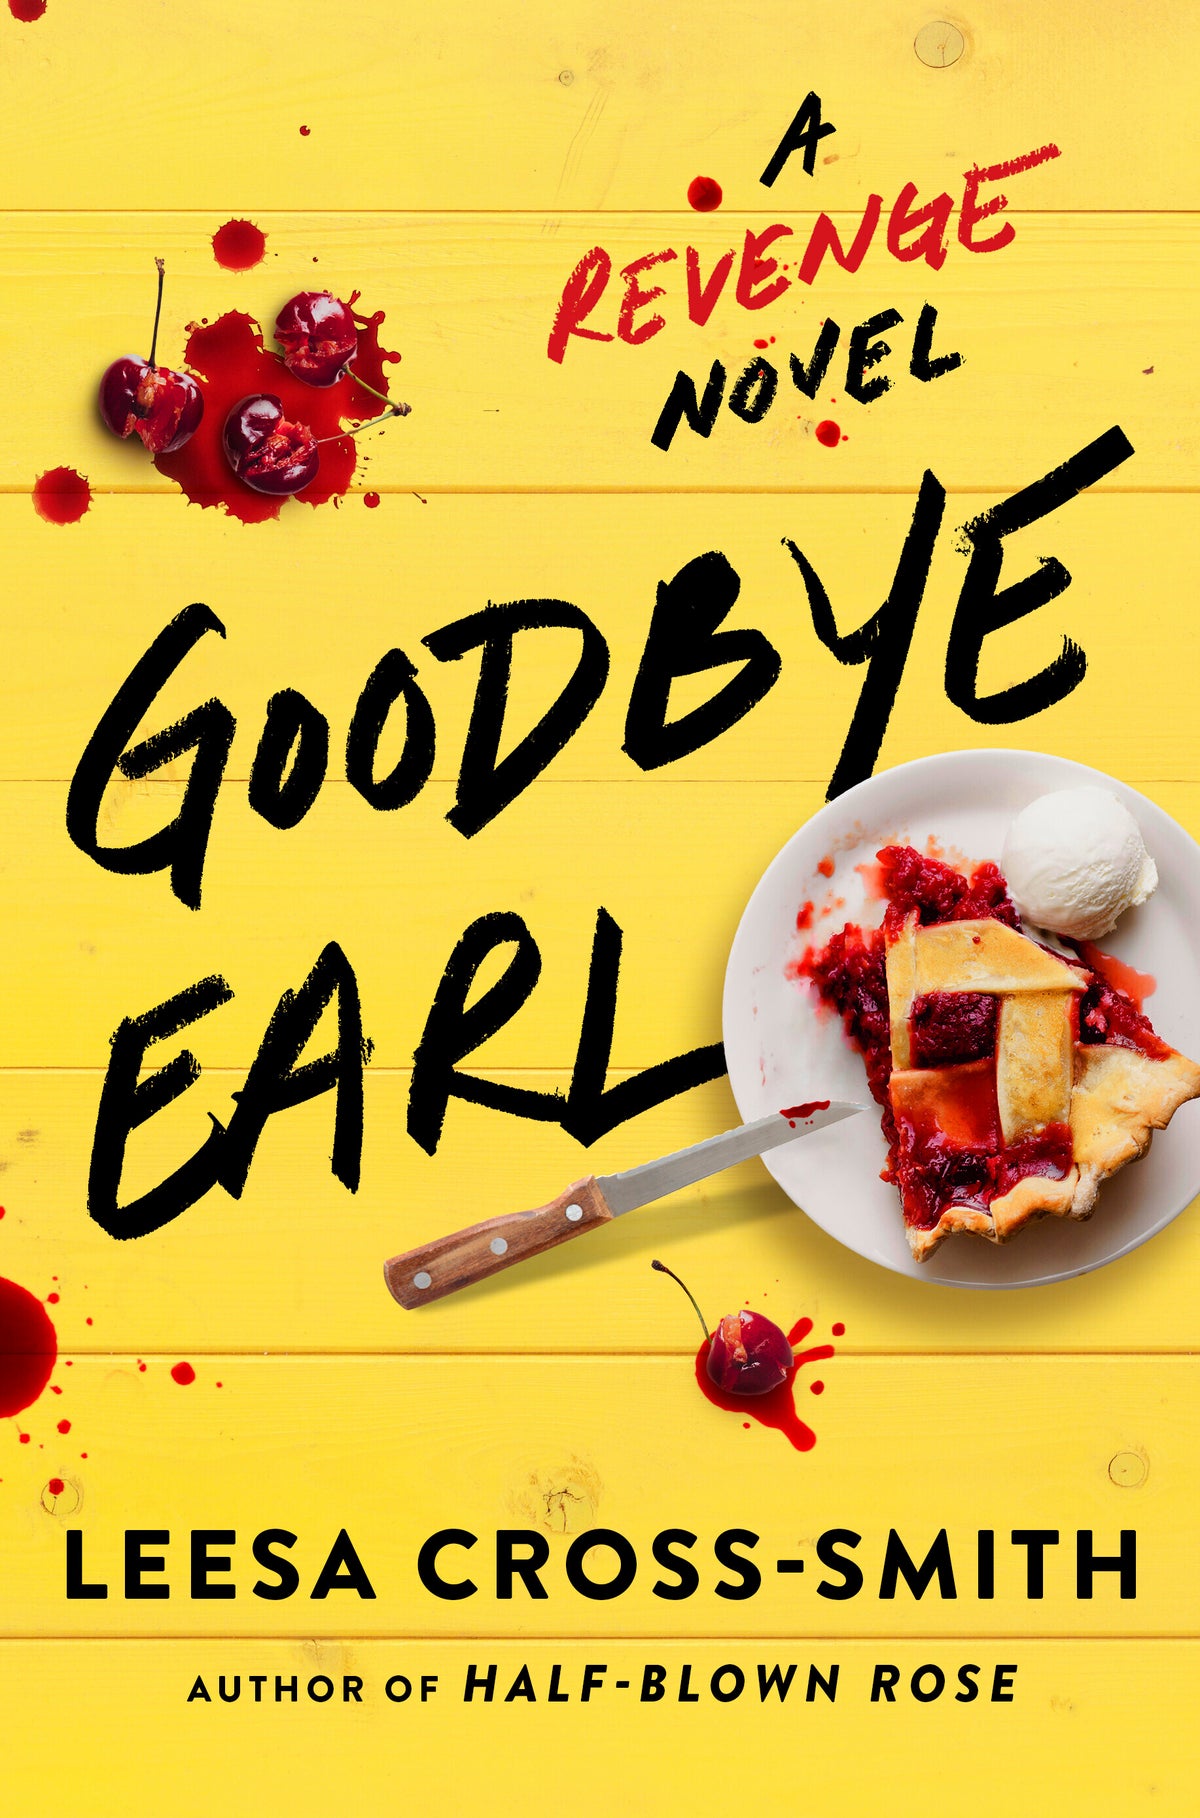 Book Review: Small-town nostalgia and inspiring sisterhood make ‘Goodbye Earl’ ideal summer reading